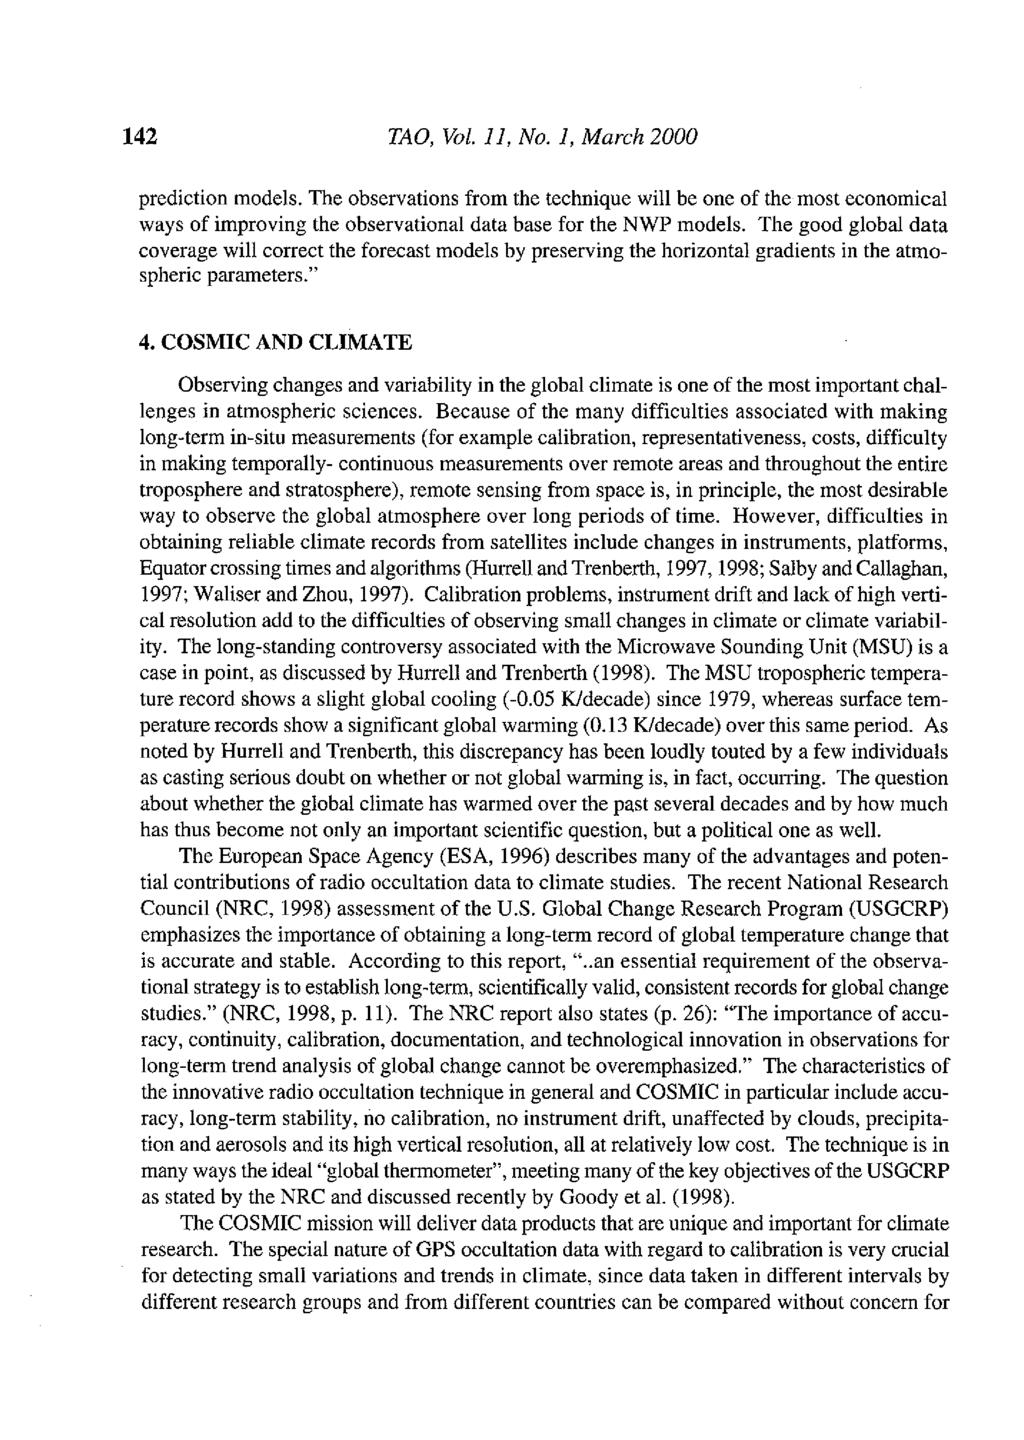 142, Vol. 11, No.1, March 2000 prediction models. The observations from the technique will be one of the most economical ways of improving the observational data base for the NWP models.